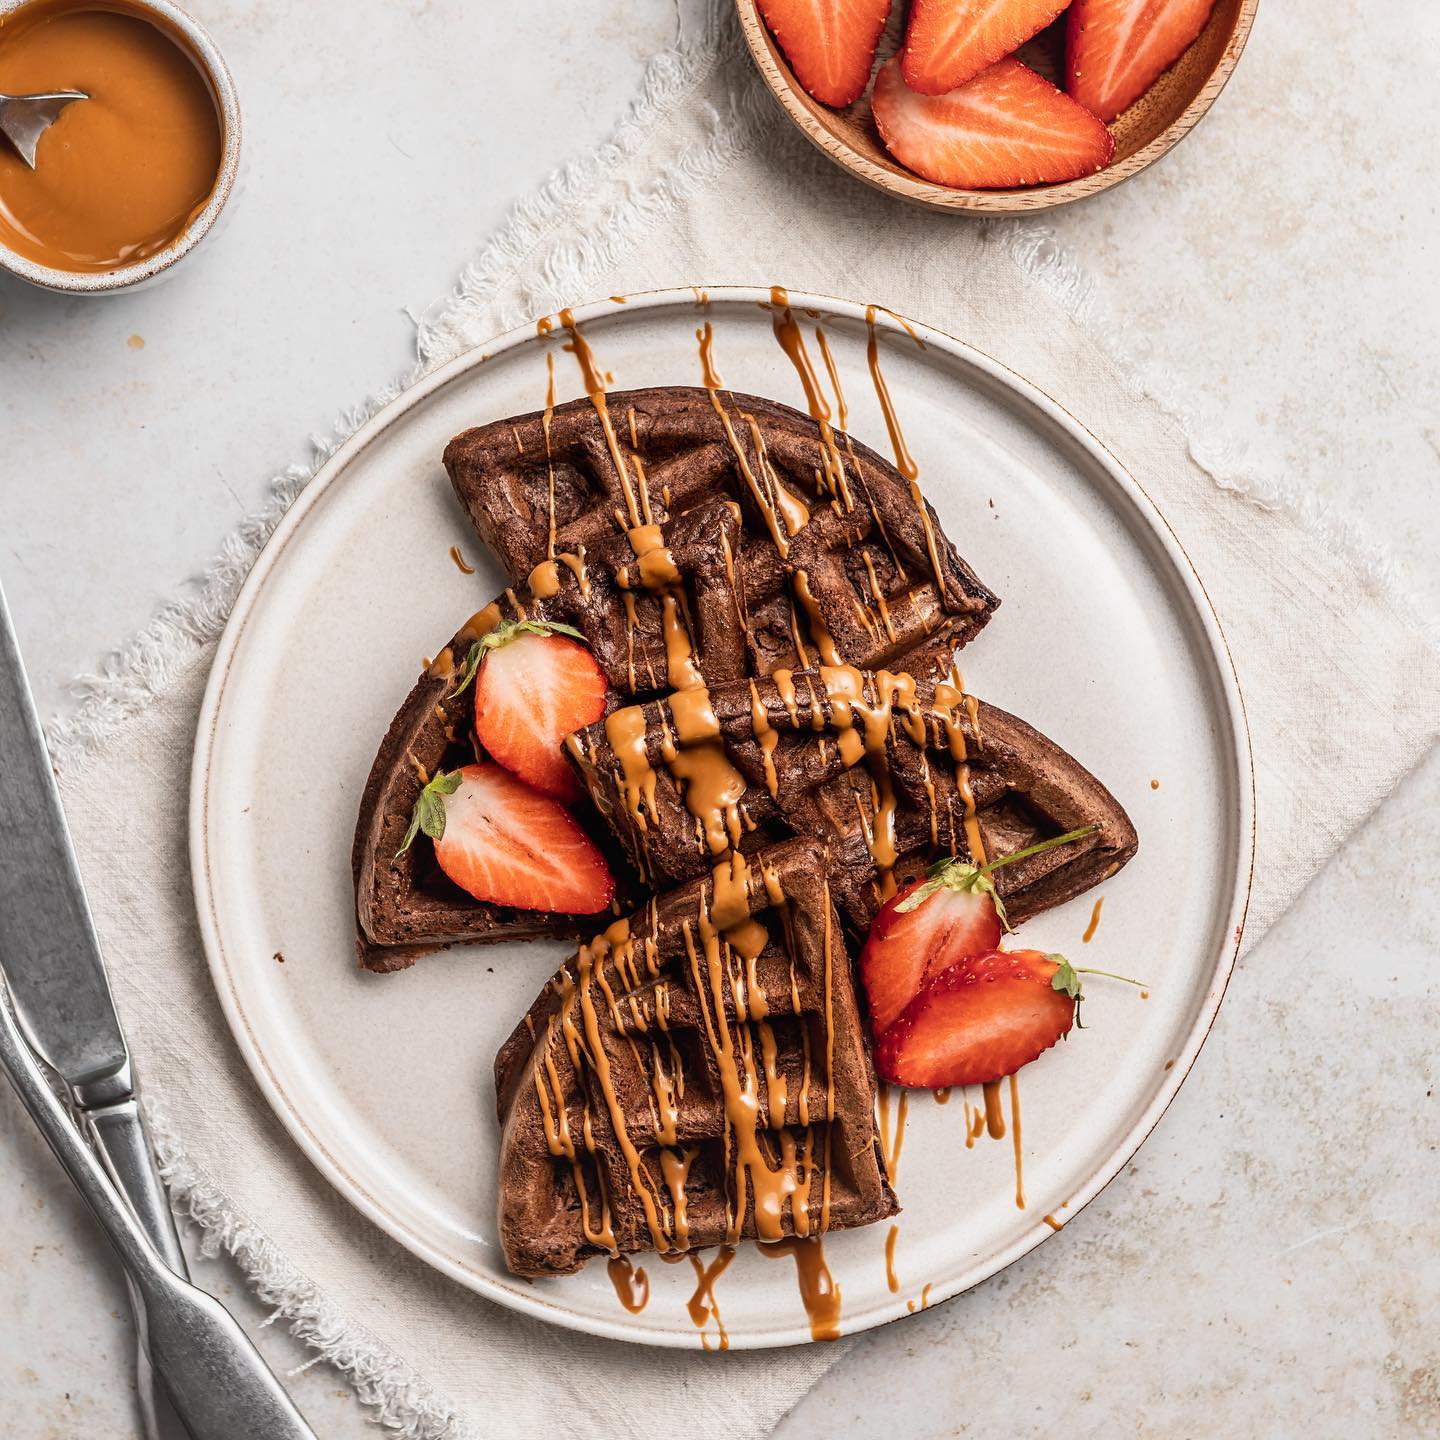 CHOCOLATE & BISCOFF PROTEIN WAFFLES//
I’m staying inside and eating waffles today- who’s with me!? 😂 The British weather certainly is confused right now 🌧 it feels like winter 😫. If you want to treat yourself to a tasty but quick and easy breakkie this morning hit SAVE to give this waffle recipe a try!

Serves 2
INGREDIENTS
50g self raising flour 
2 tbsp cocoa powder
25g chocolate protein powder
1/2 tsp bicarbonate soda 
1 tbsp maple syrup
1 large egg
120ml unsweetened almond milk
TOPPINGS
40g Biscoff spread, melted
80g sliced strawberries

METHOD
1. Make sure the waffle maker is preheated and lightly greased.
2. Add all the waffle ingredients together and whisk until smooth and combined.
3. Slowly pour half the batter into the waffle maker and close the lid. Cook for around 5 minutes until risen and fluffy.
4. Melt the Biscoff spread gently in the microwave, then drizzle over the top and add the sliced strawberries.

Per serving: Kcal 441 Carbs 46 Fat 18 Protein 23

Don’t forget to tag @sarahshealthykitchen if you give this one a try! 🤍